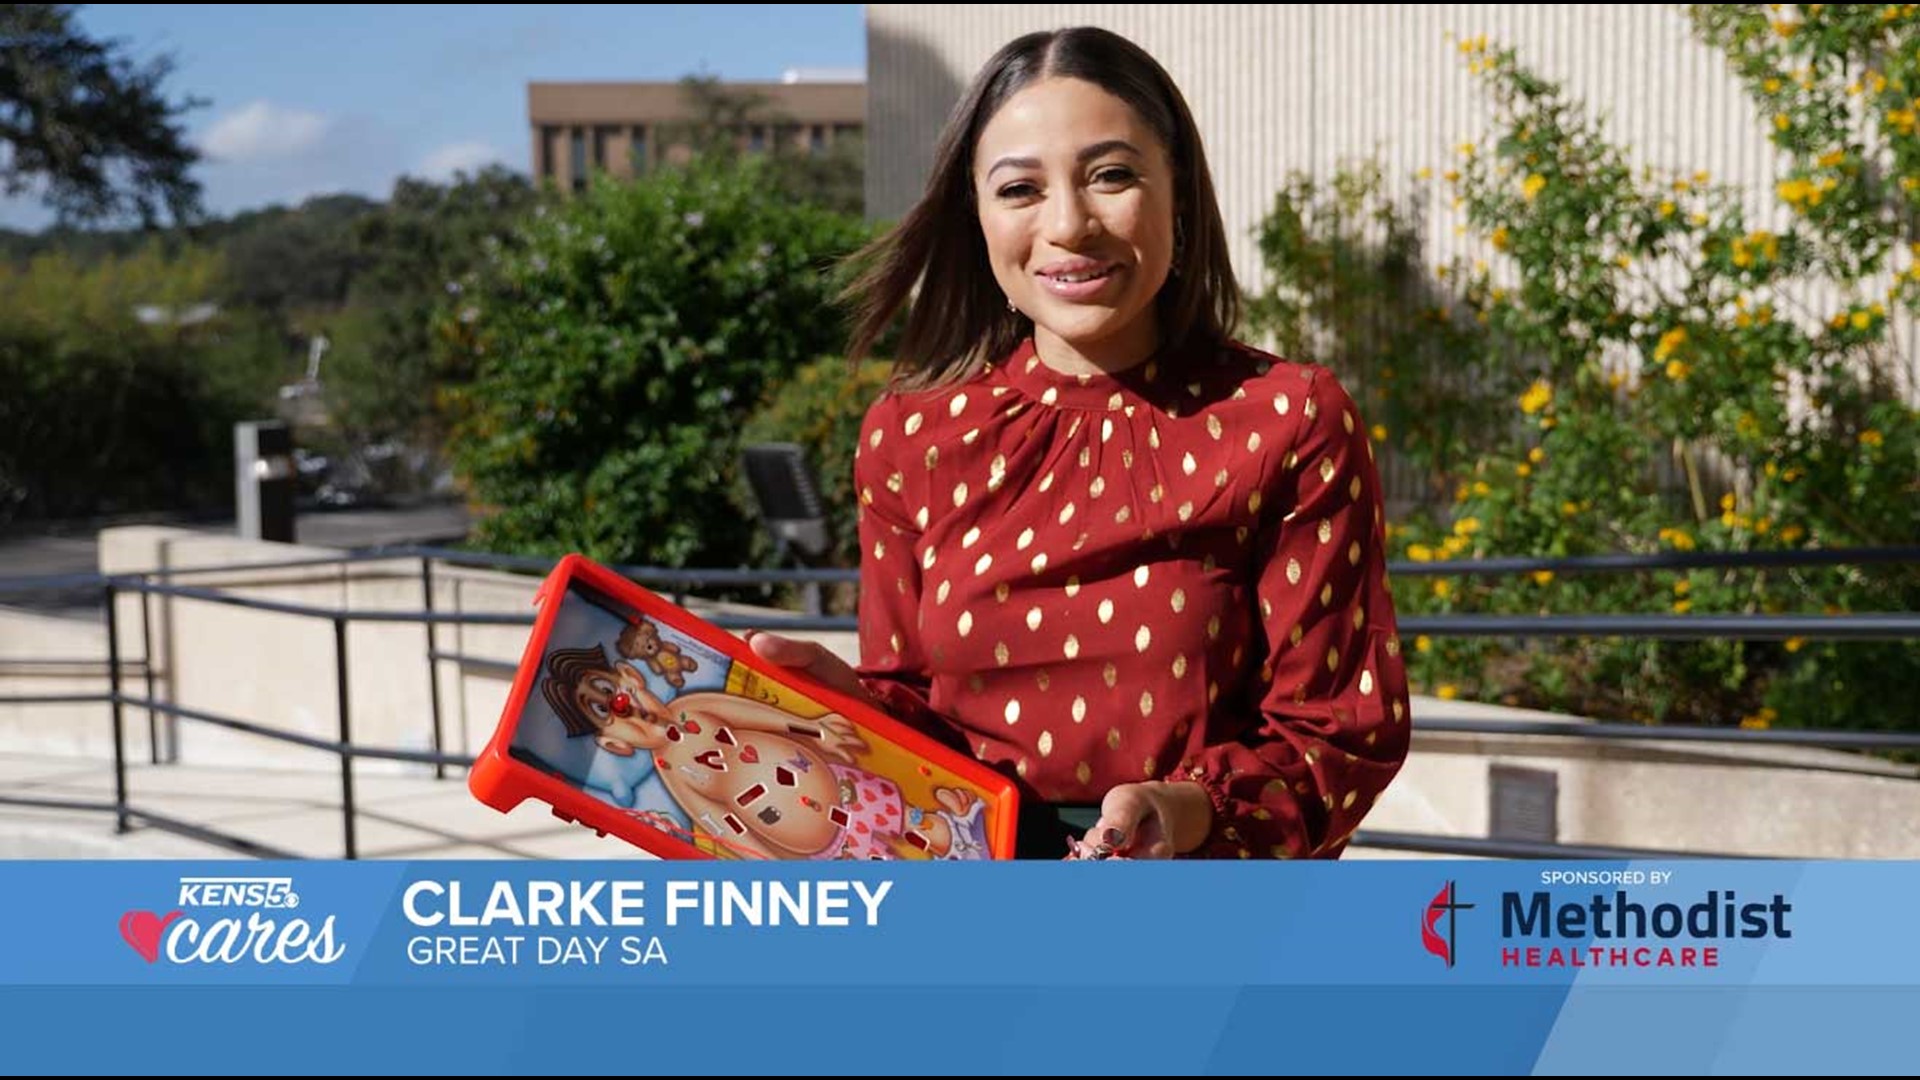 KENS 5's Clarke Finney says one of her favorite toys growing up was Operation! You can help create lasting memories for children in need this holiday season.